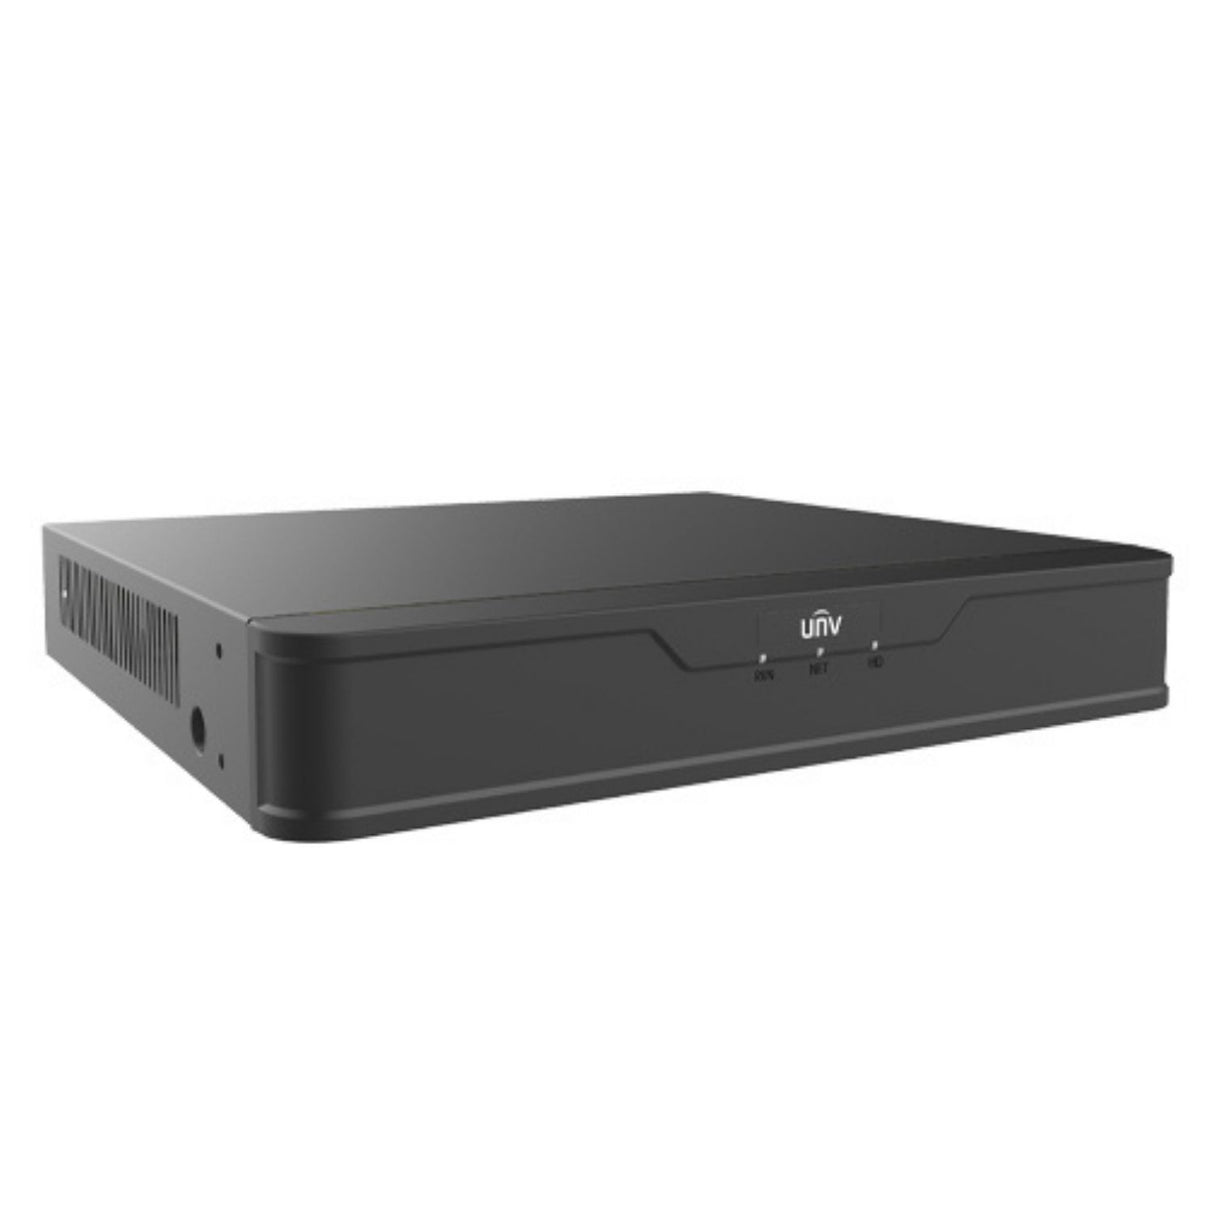 Univew Network Video Recorder: 8 Channel Easy Series, 8X PoE - NVR501-08B-P8